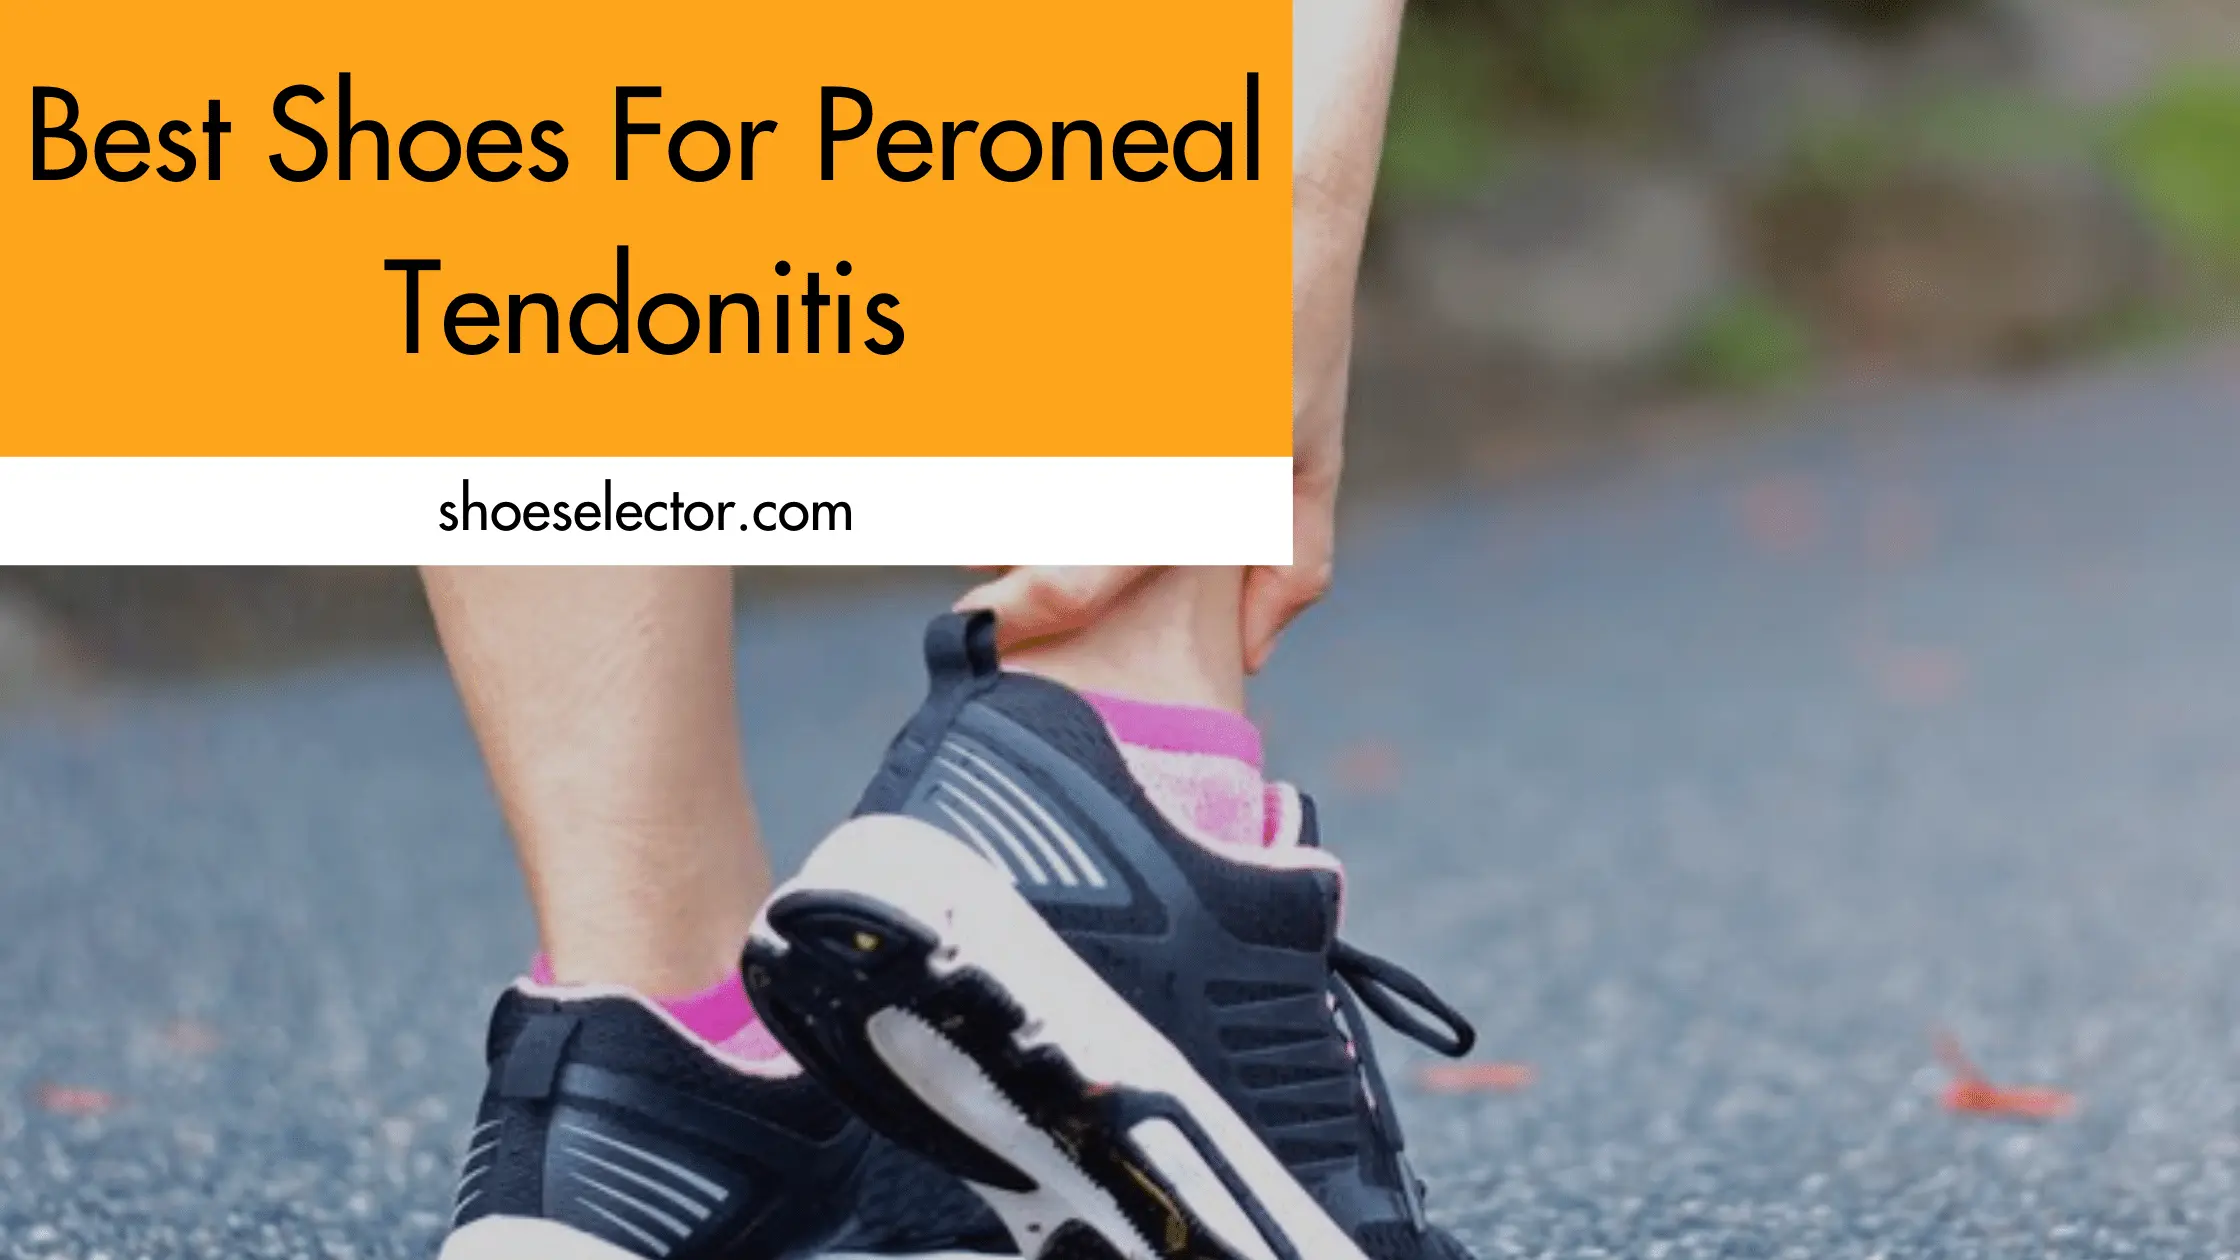 Best Shoes For Peroneal Tendonitis | Buying Guide